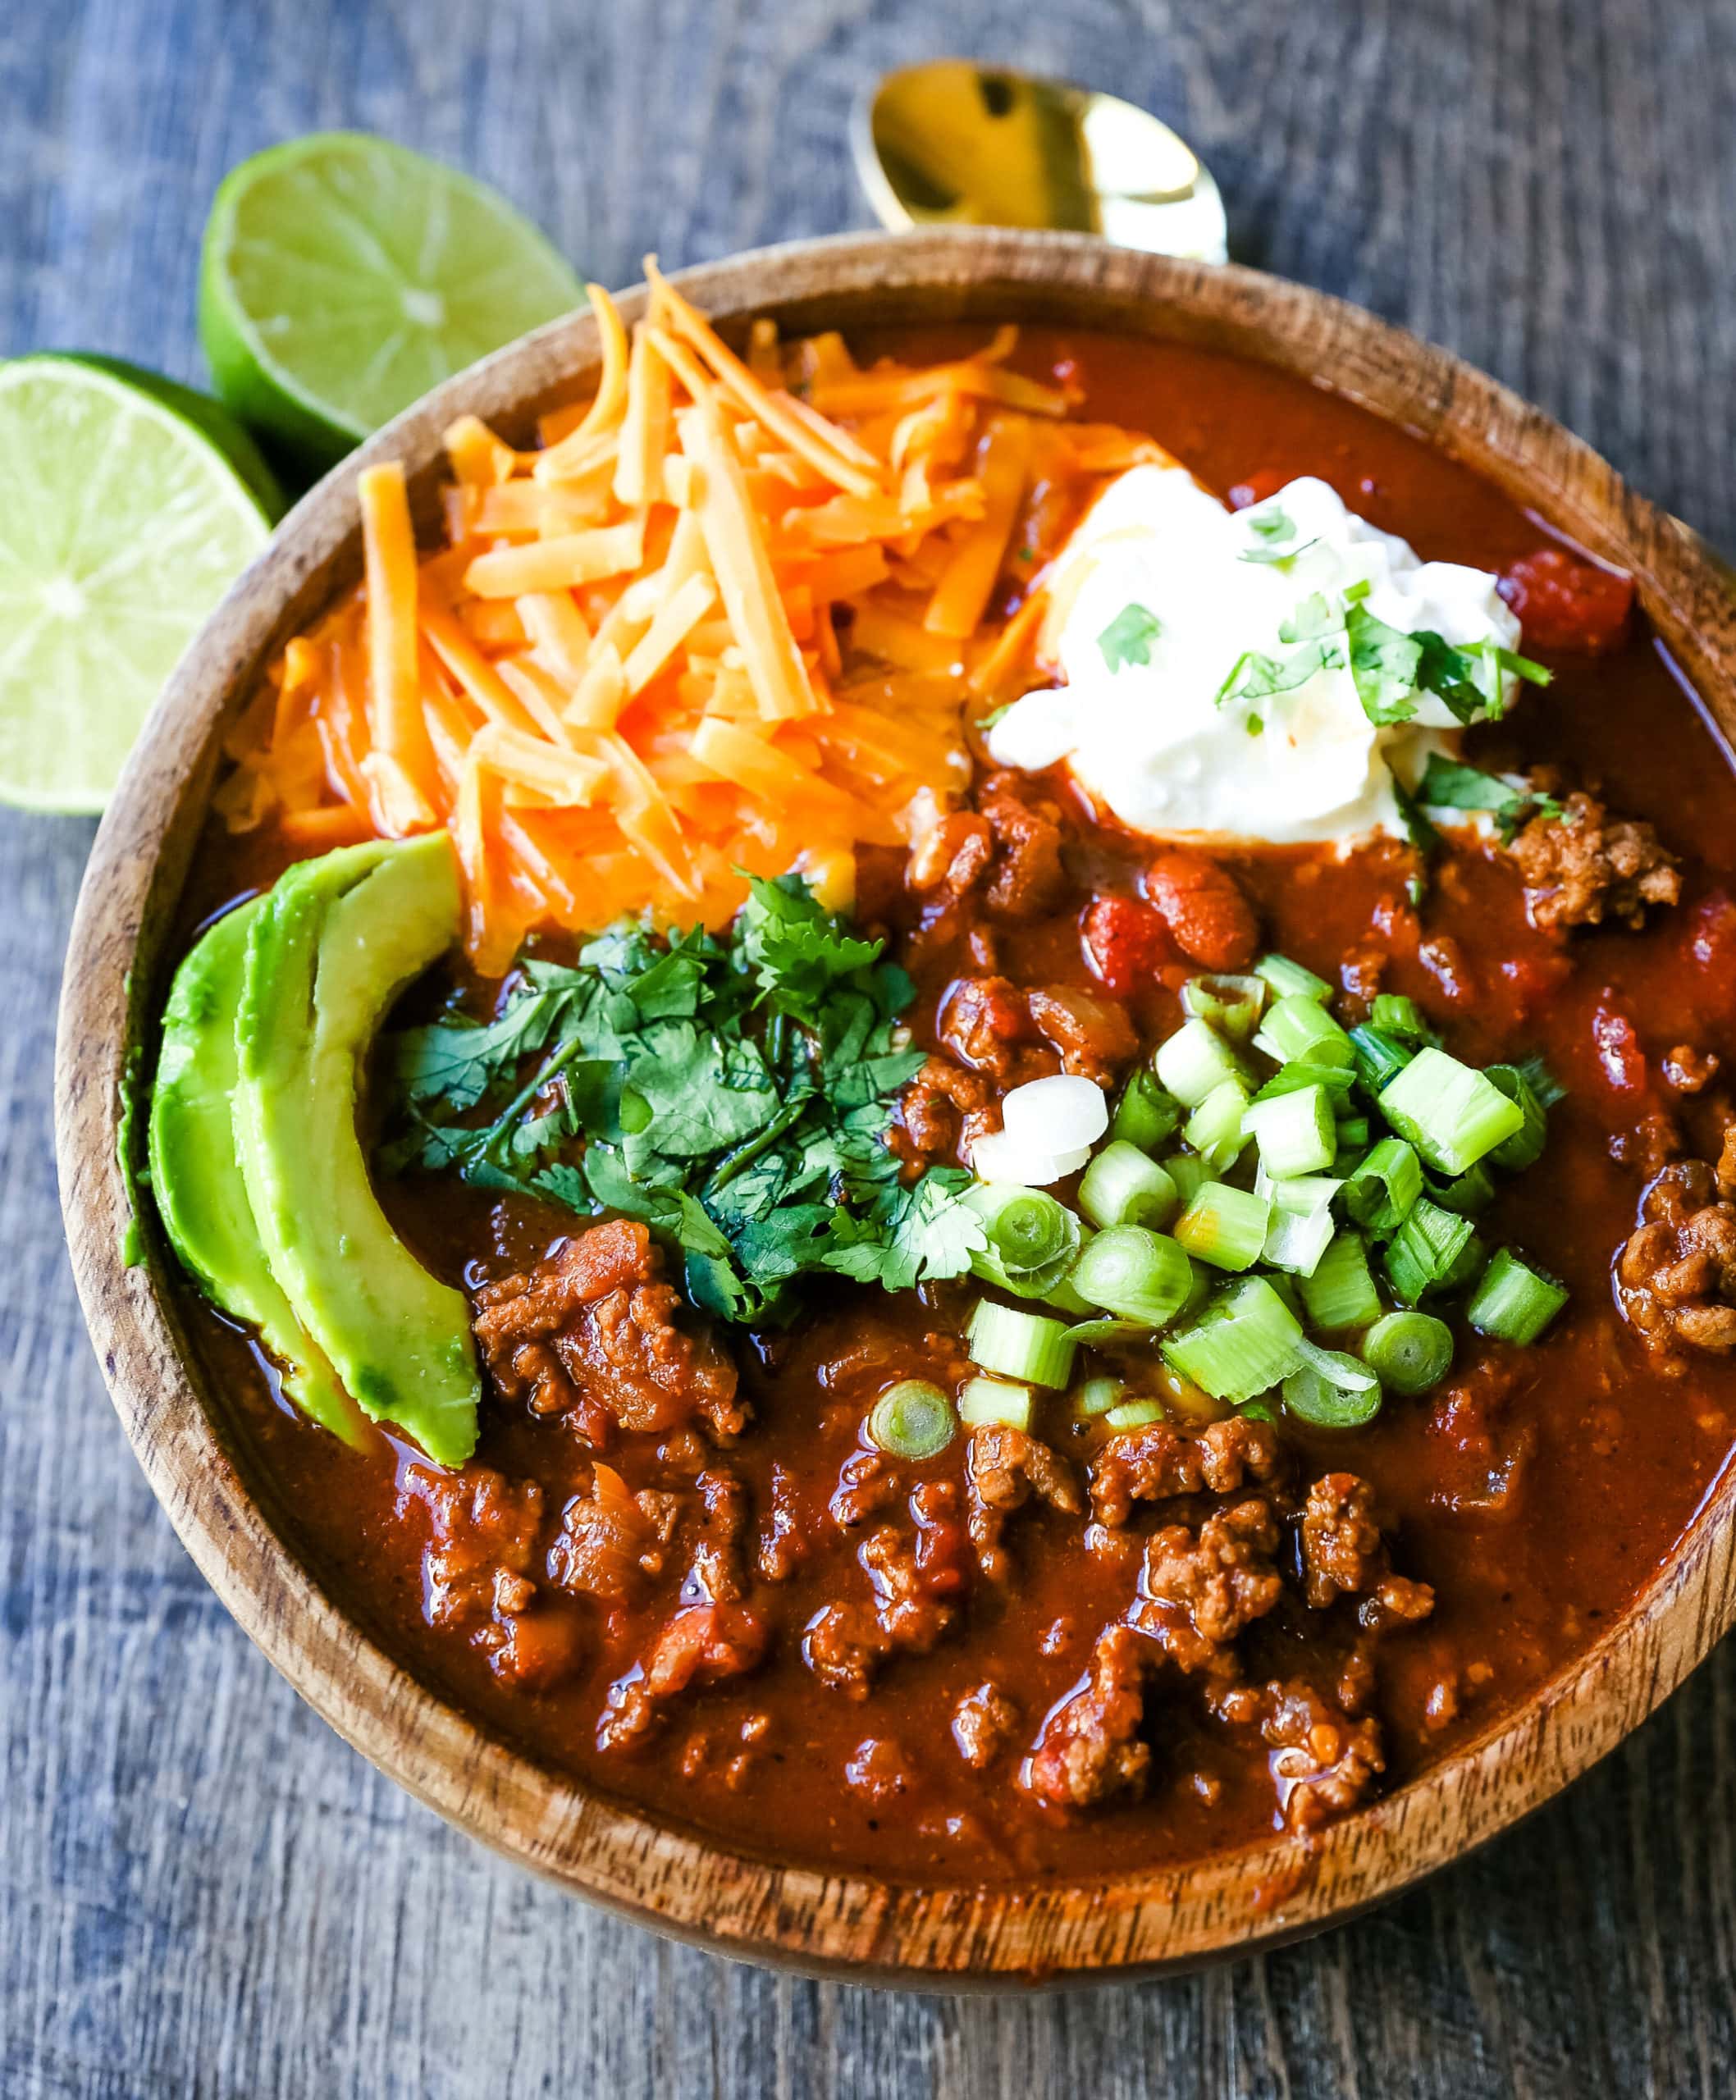 Award-Winning Beef Chili Recipe Chili Cook-Off Winning Beef Chili Recipe. There are SECRET ingredients that make this a winning chili recipe. How to make the best chili around! People will be begging for the recipe and want to know your secrets. www.modernhoney.com #chili #chilirecipe #beefchili 